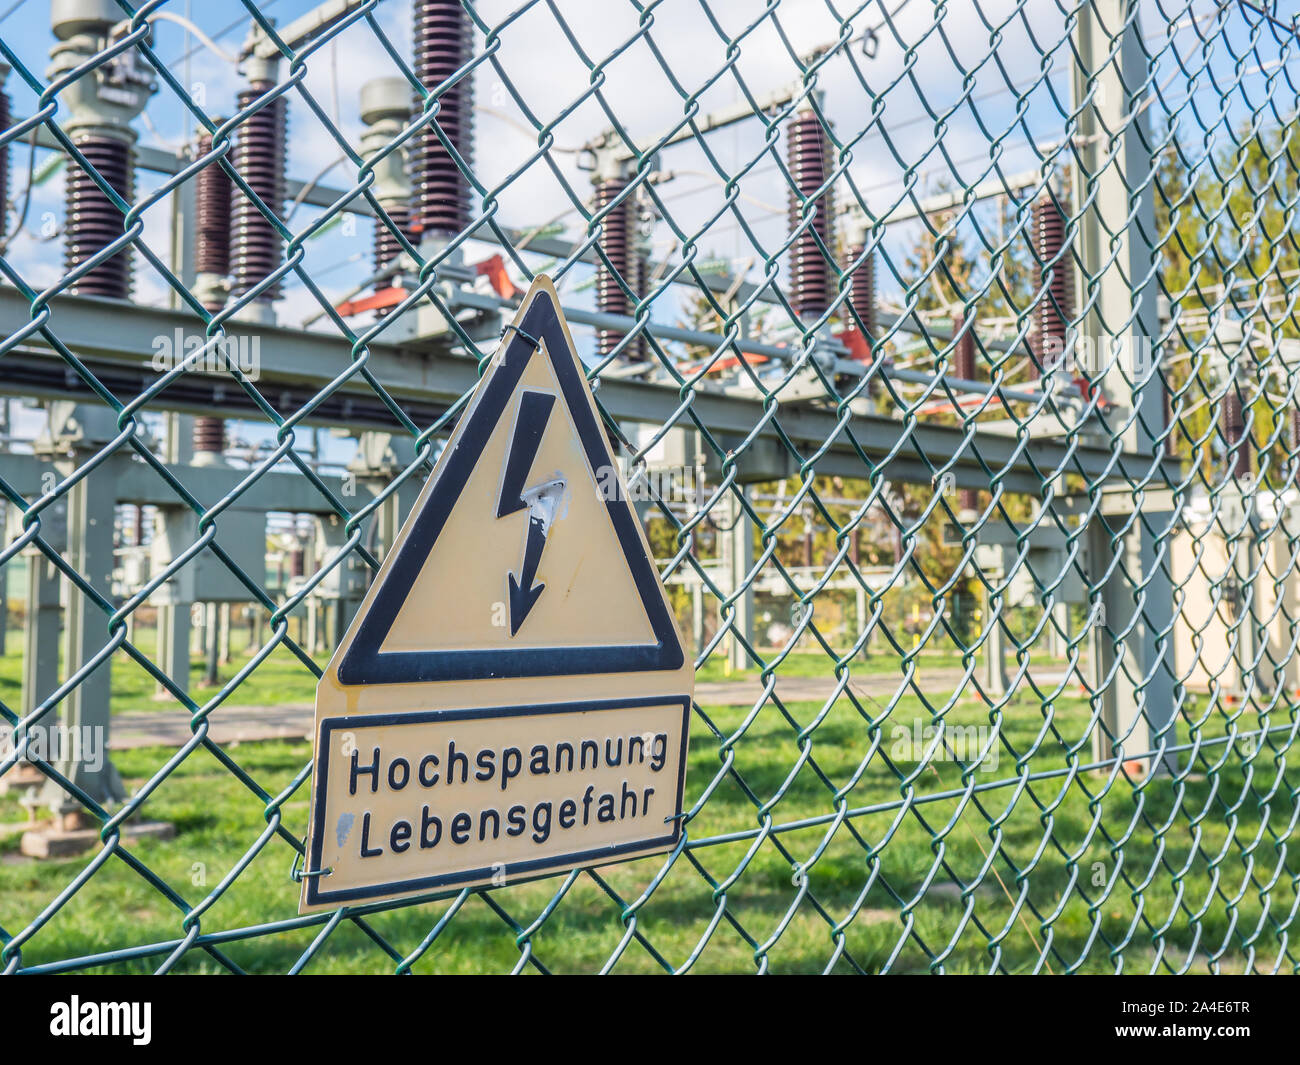 Electric coils and transformers warning sign in german Stock Photo